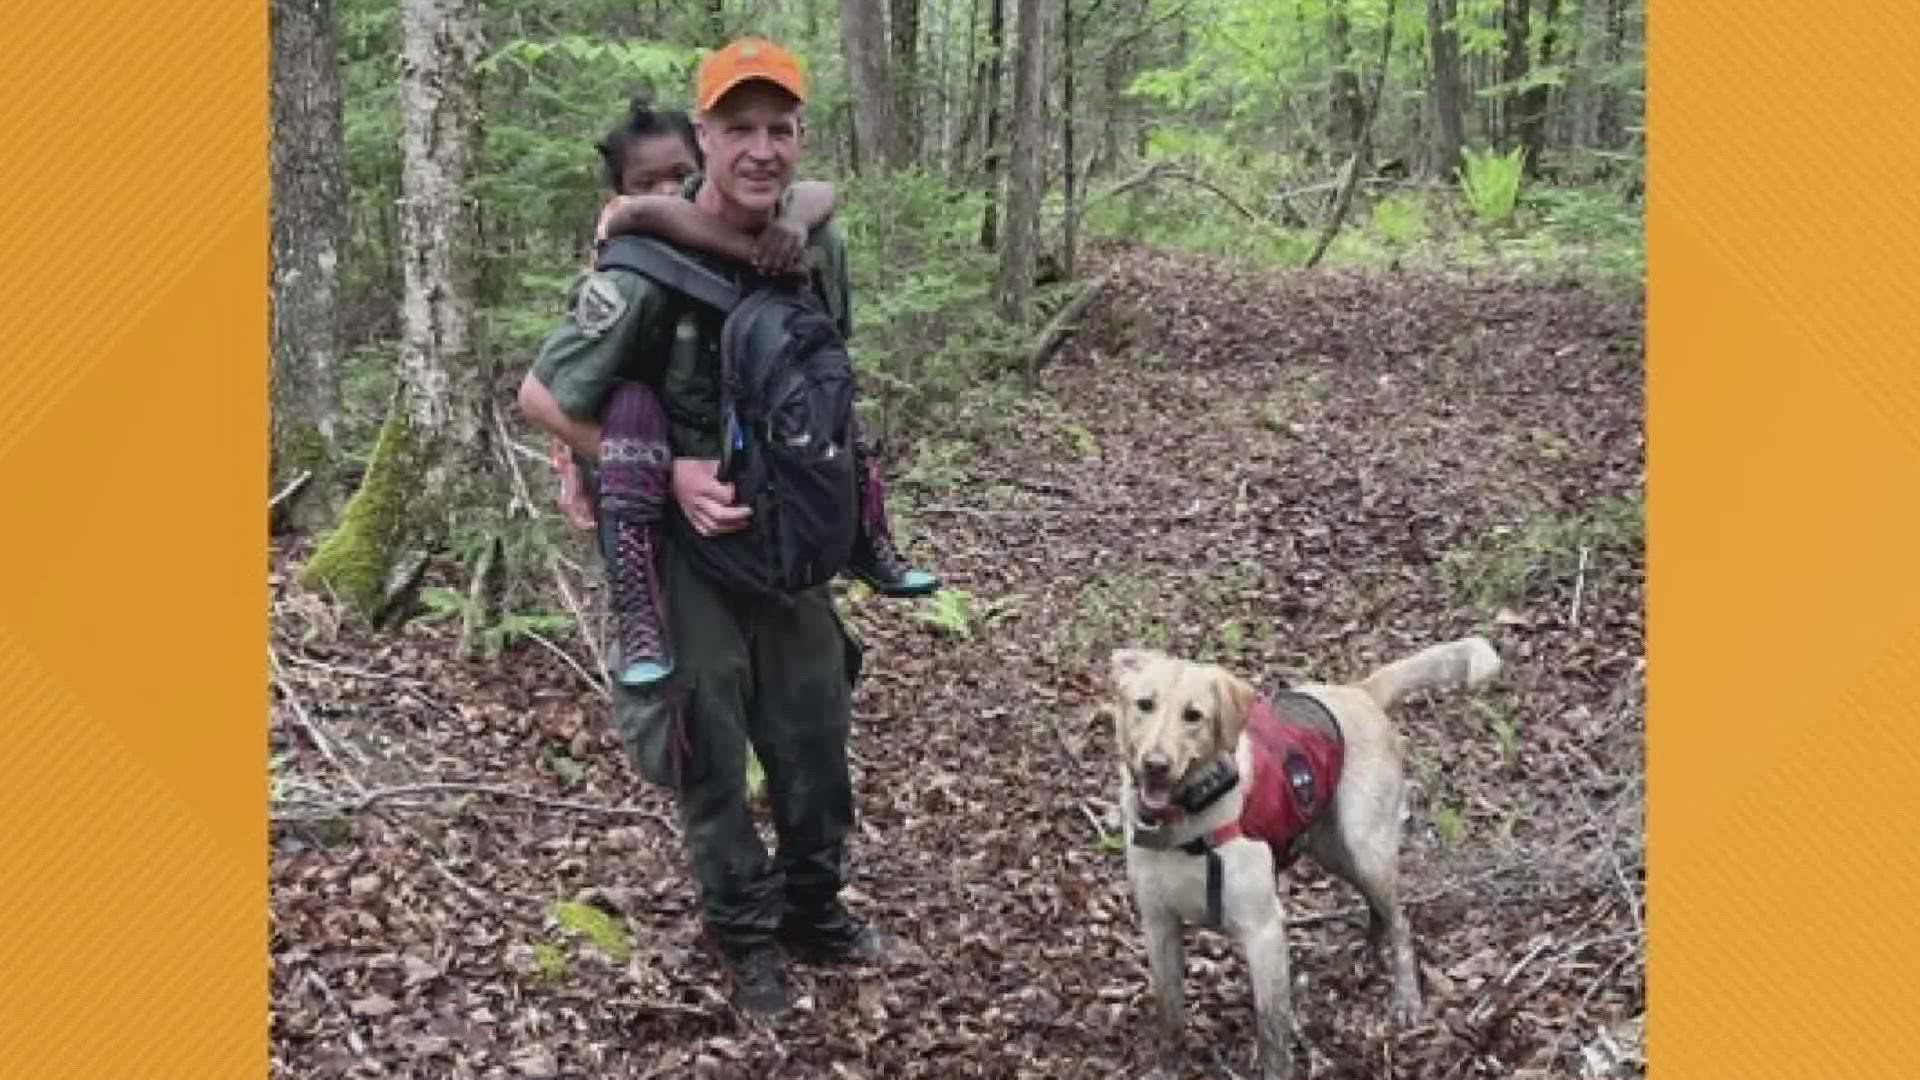 Warden Jake Voter and his K9, Koda, found two missing persons safely over the course of three days, something game warden officers say is uncommon.